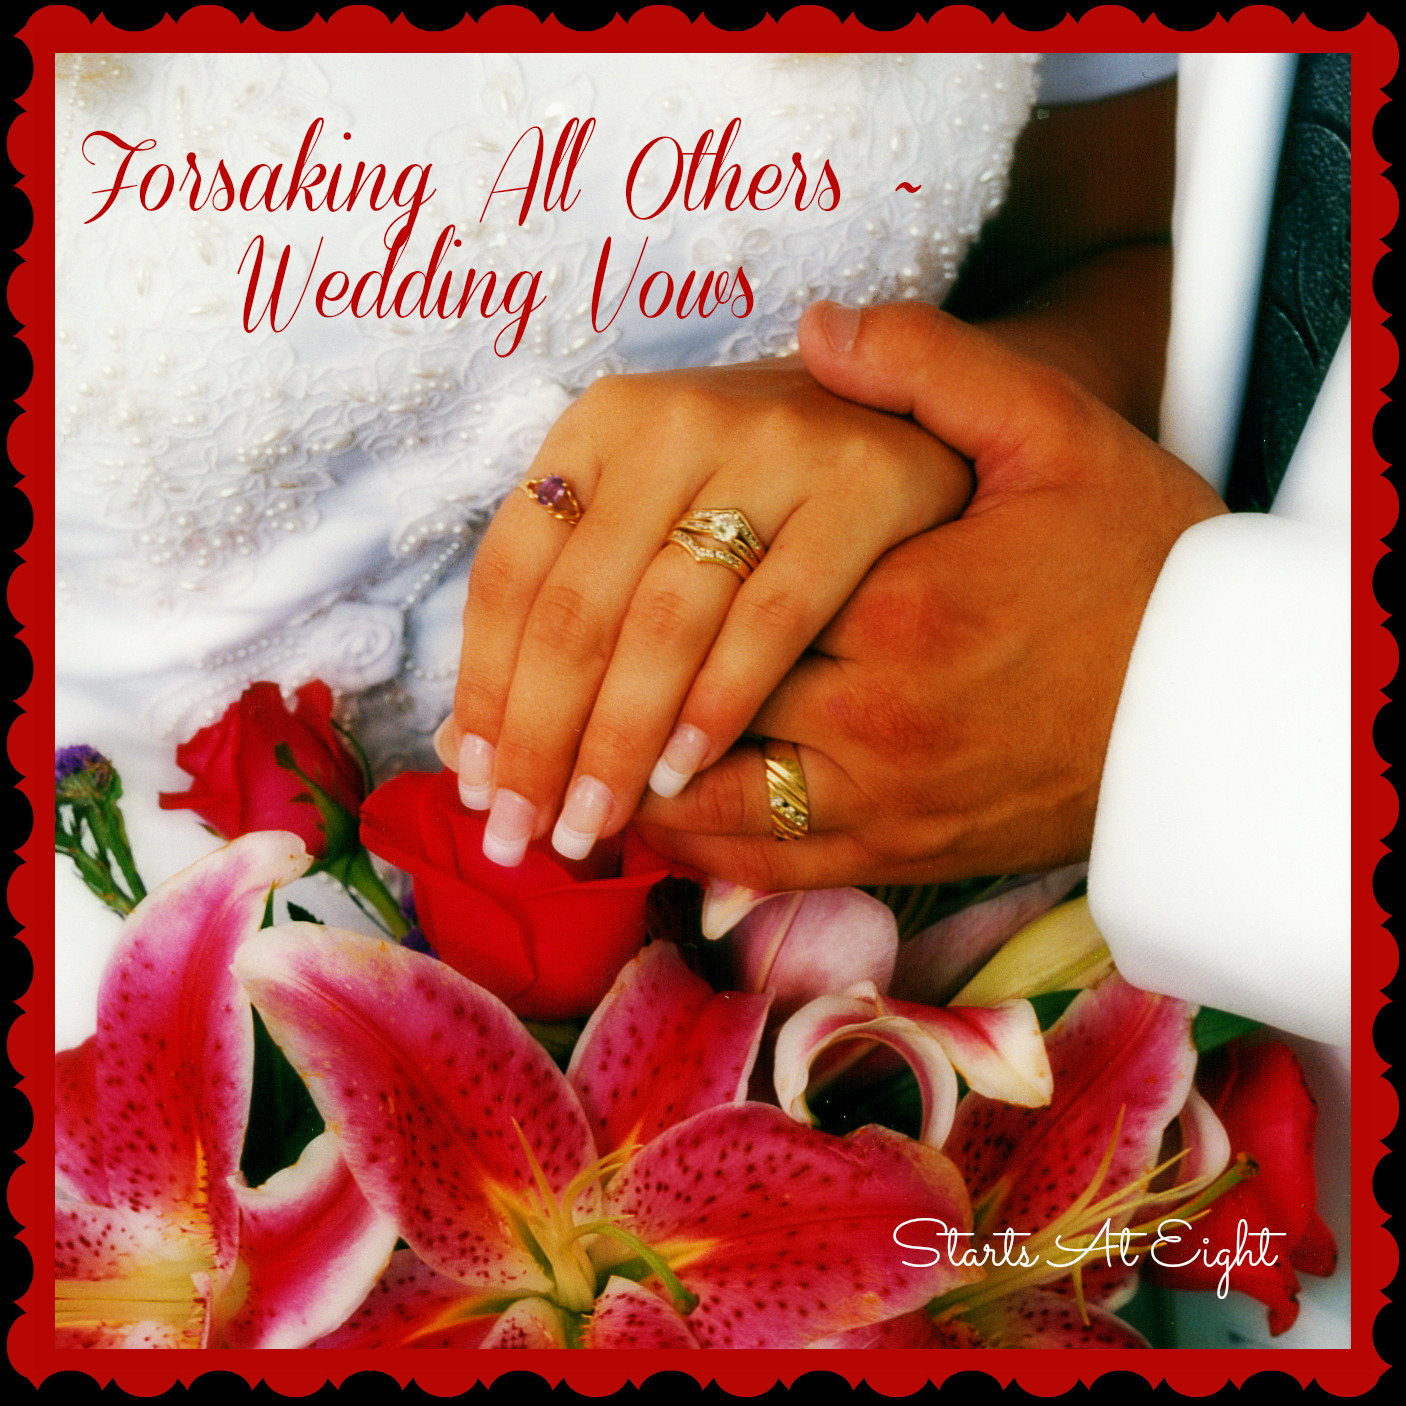 Forsaking All Others Wedding Vows
 Forsaking All Others Wedding Vows StartsAtEight